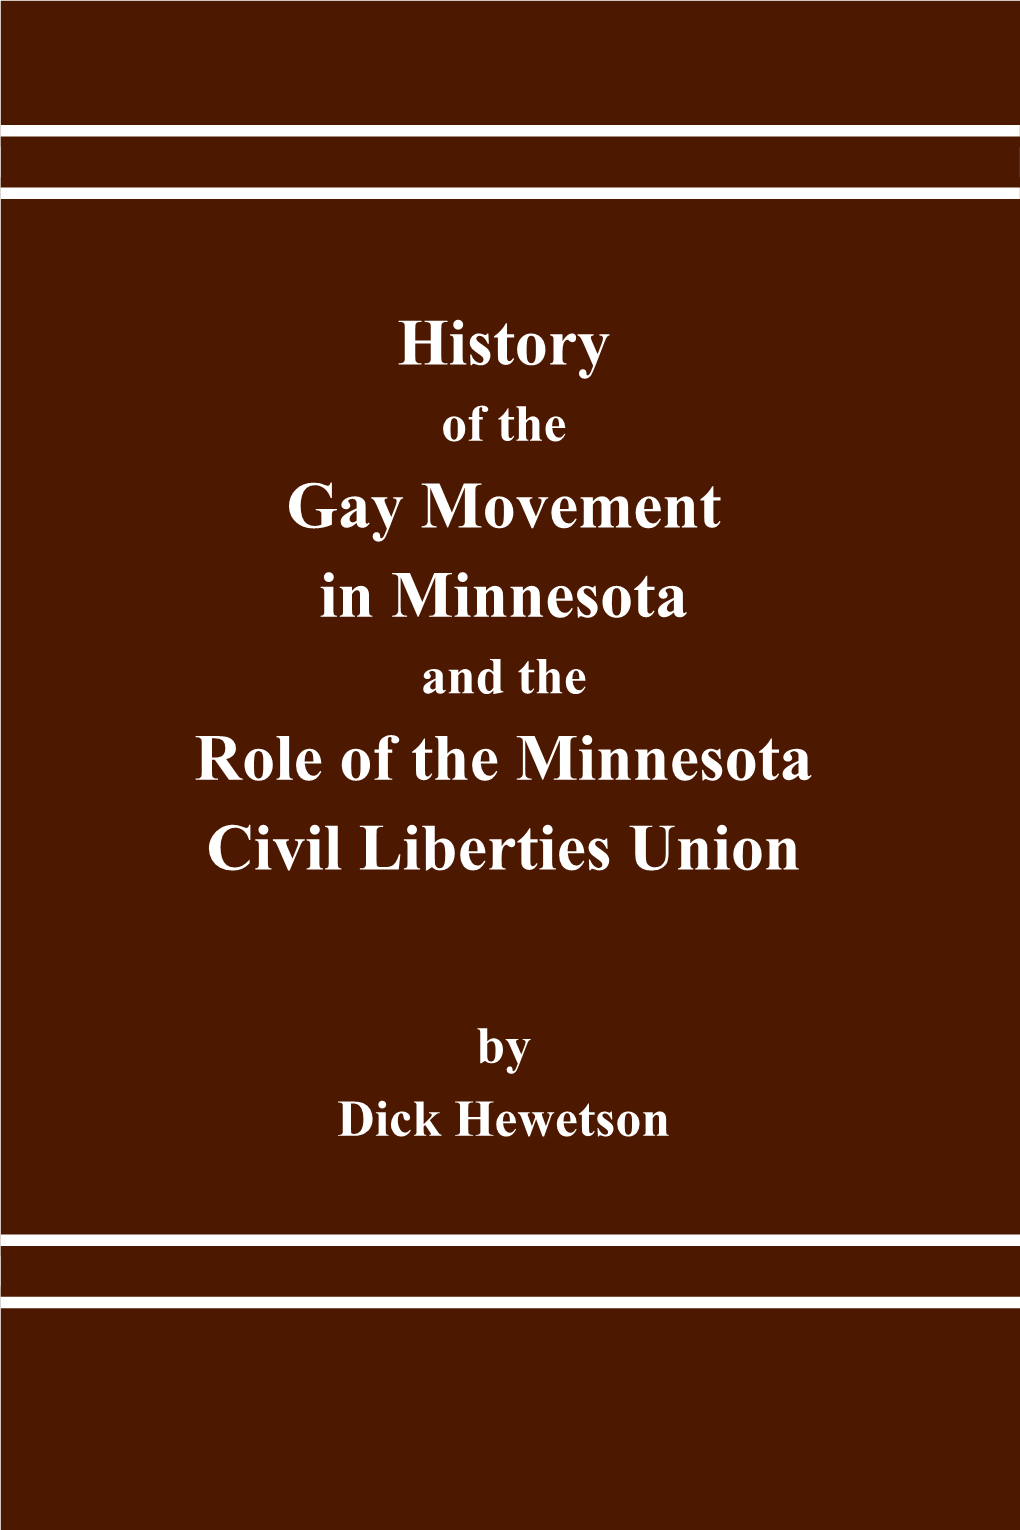 History Gay Movement in Minnesota Role of the Minnesota Civil